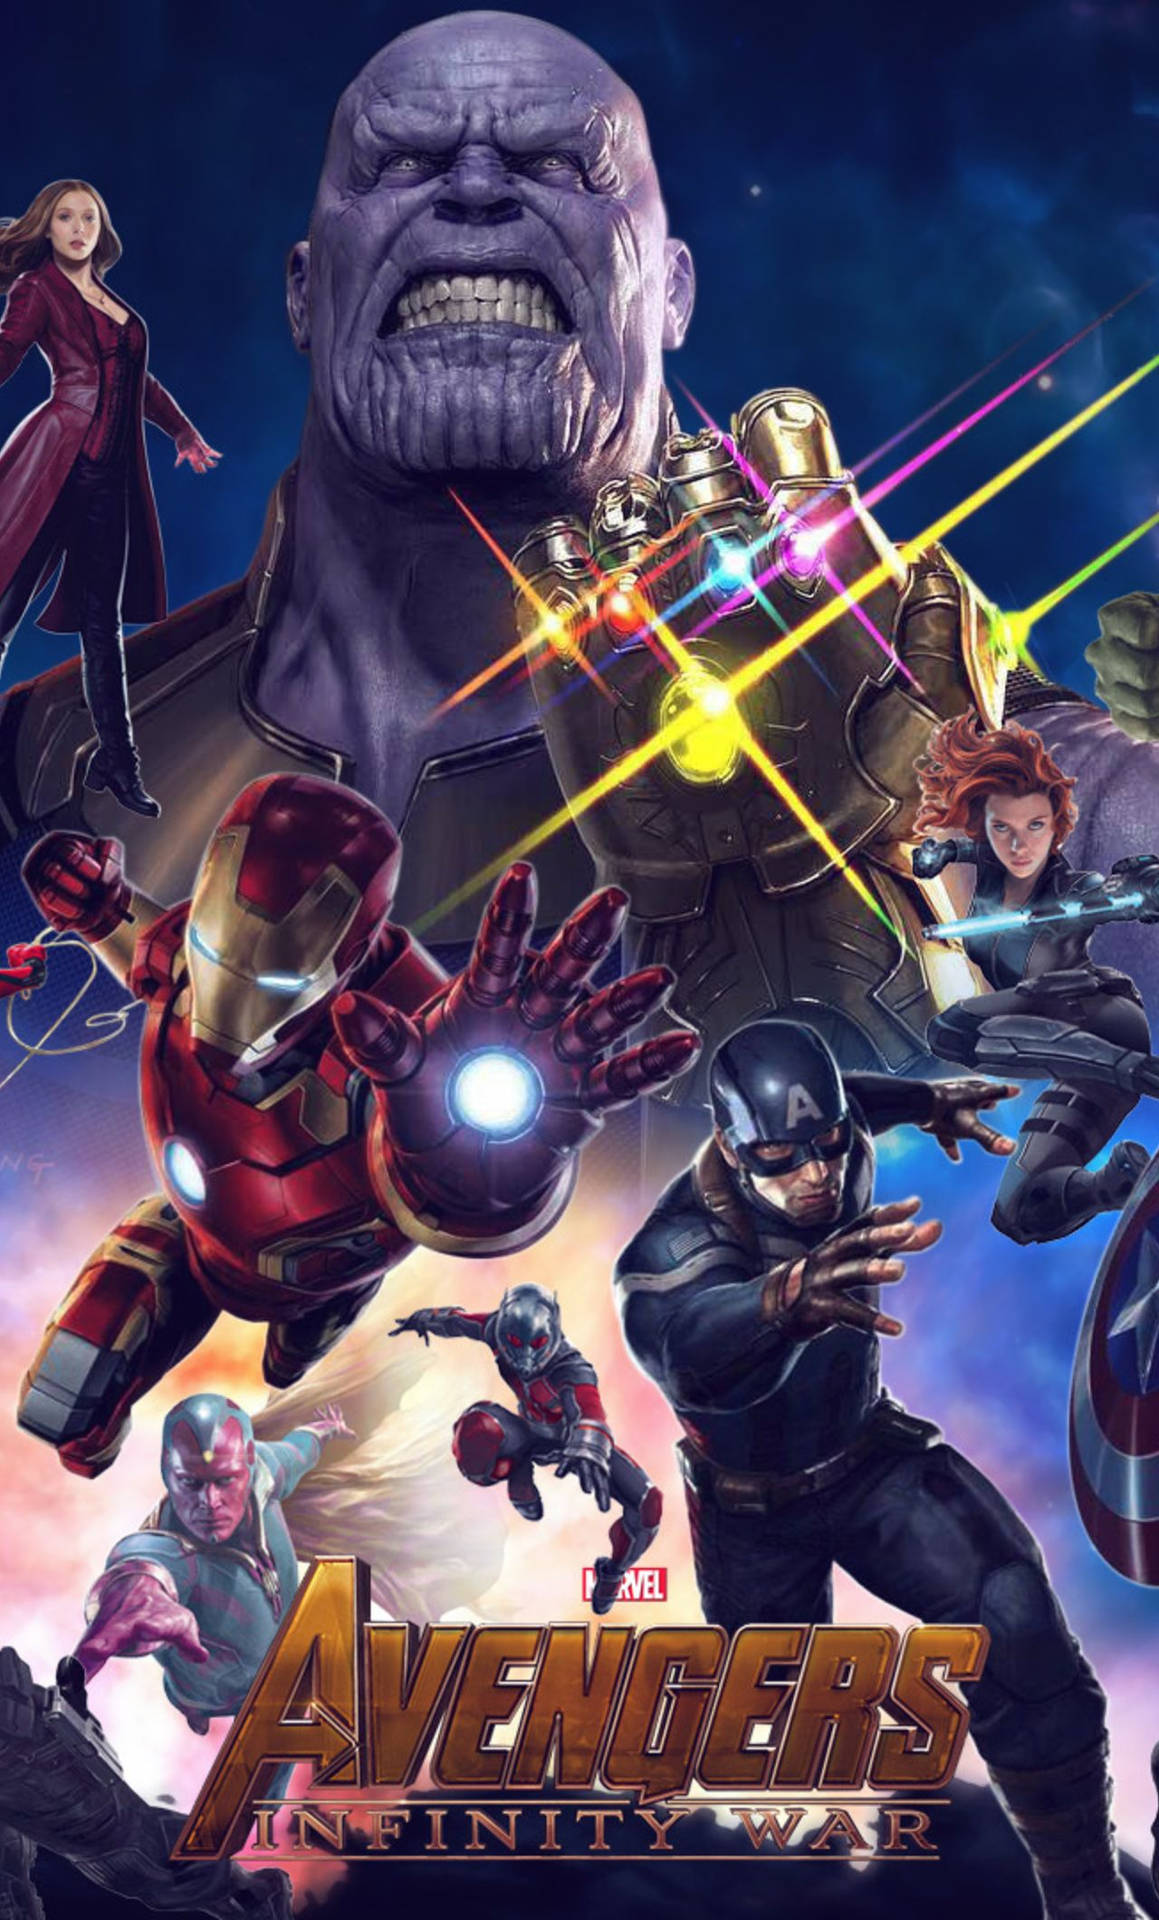 Avengers Android Infinity War Poster Wallpaper